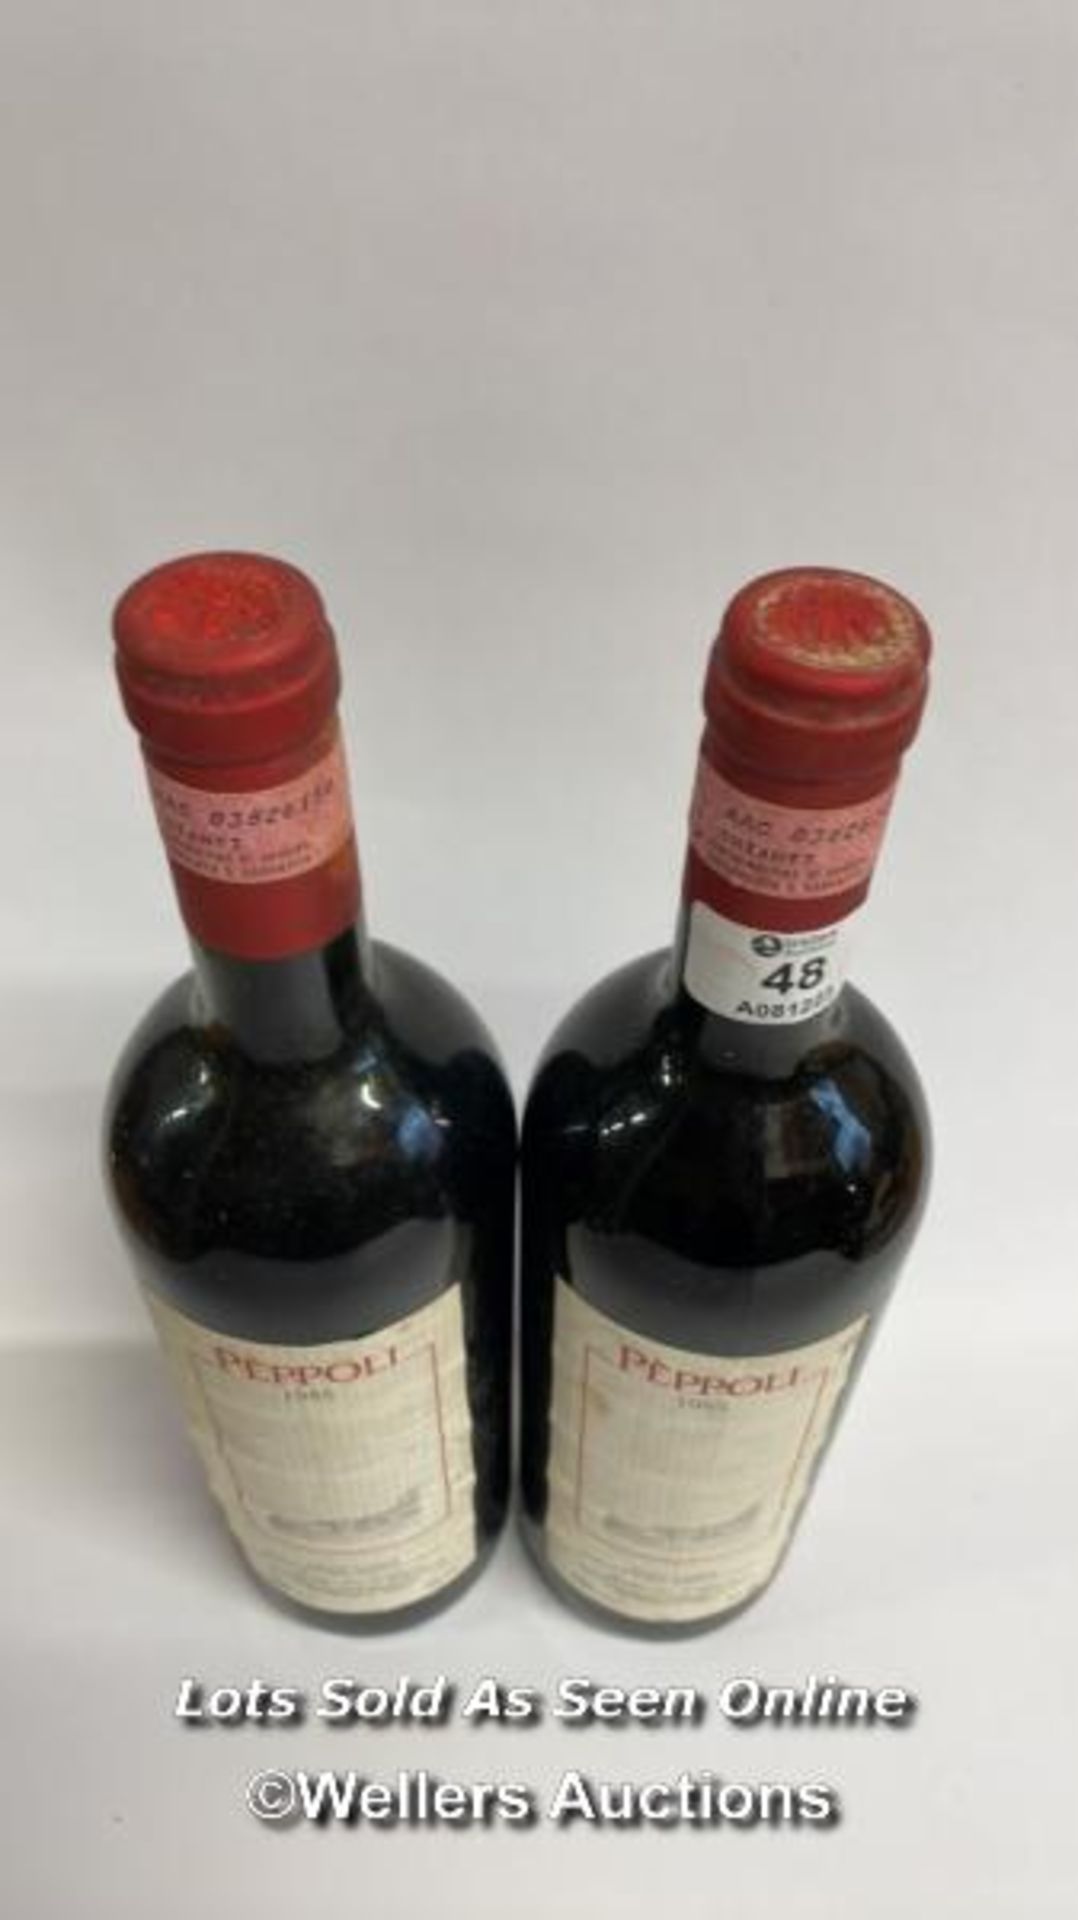 Two bottles of 1985 Peppoli Chianti Classico, 75cl, 13% vol / Please see images for fill level and - Image 4 of 5